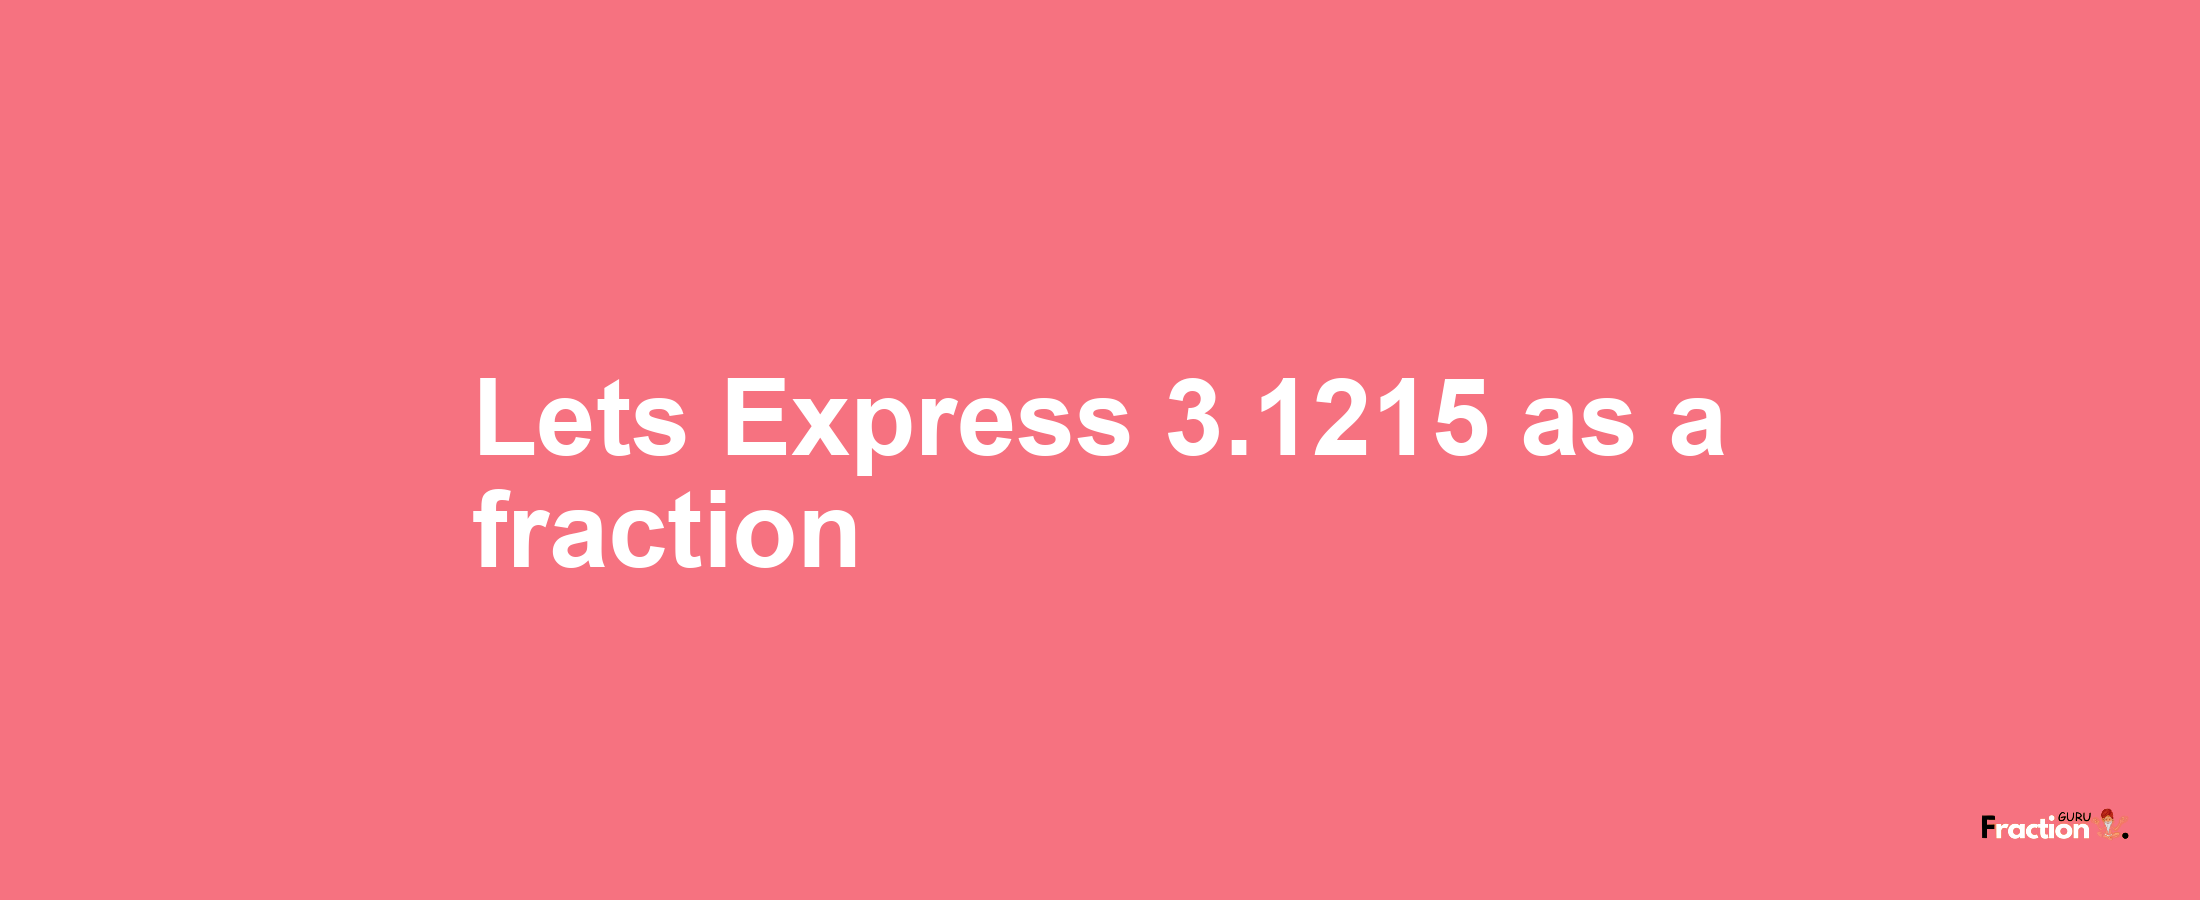 Lets Express 3.1215 as afraction